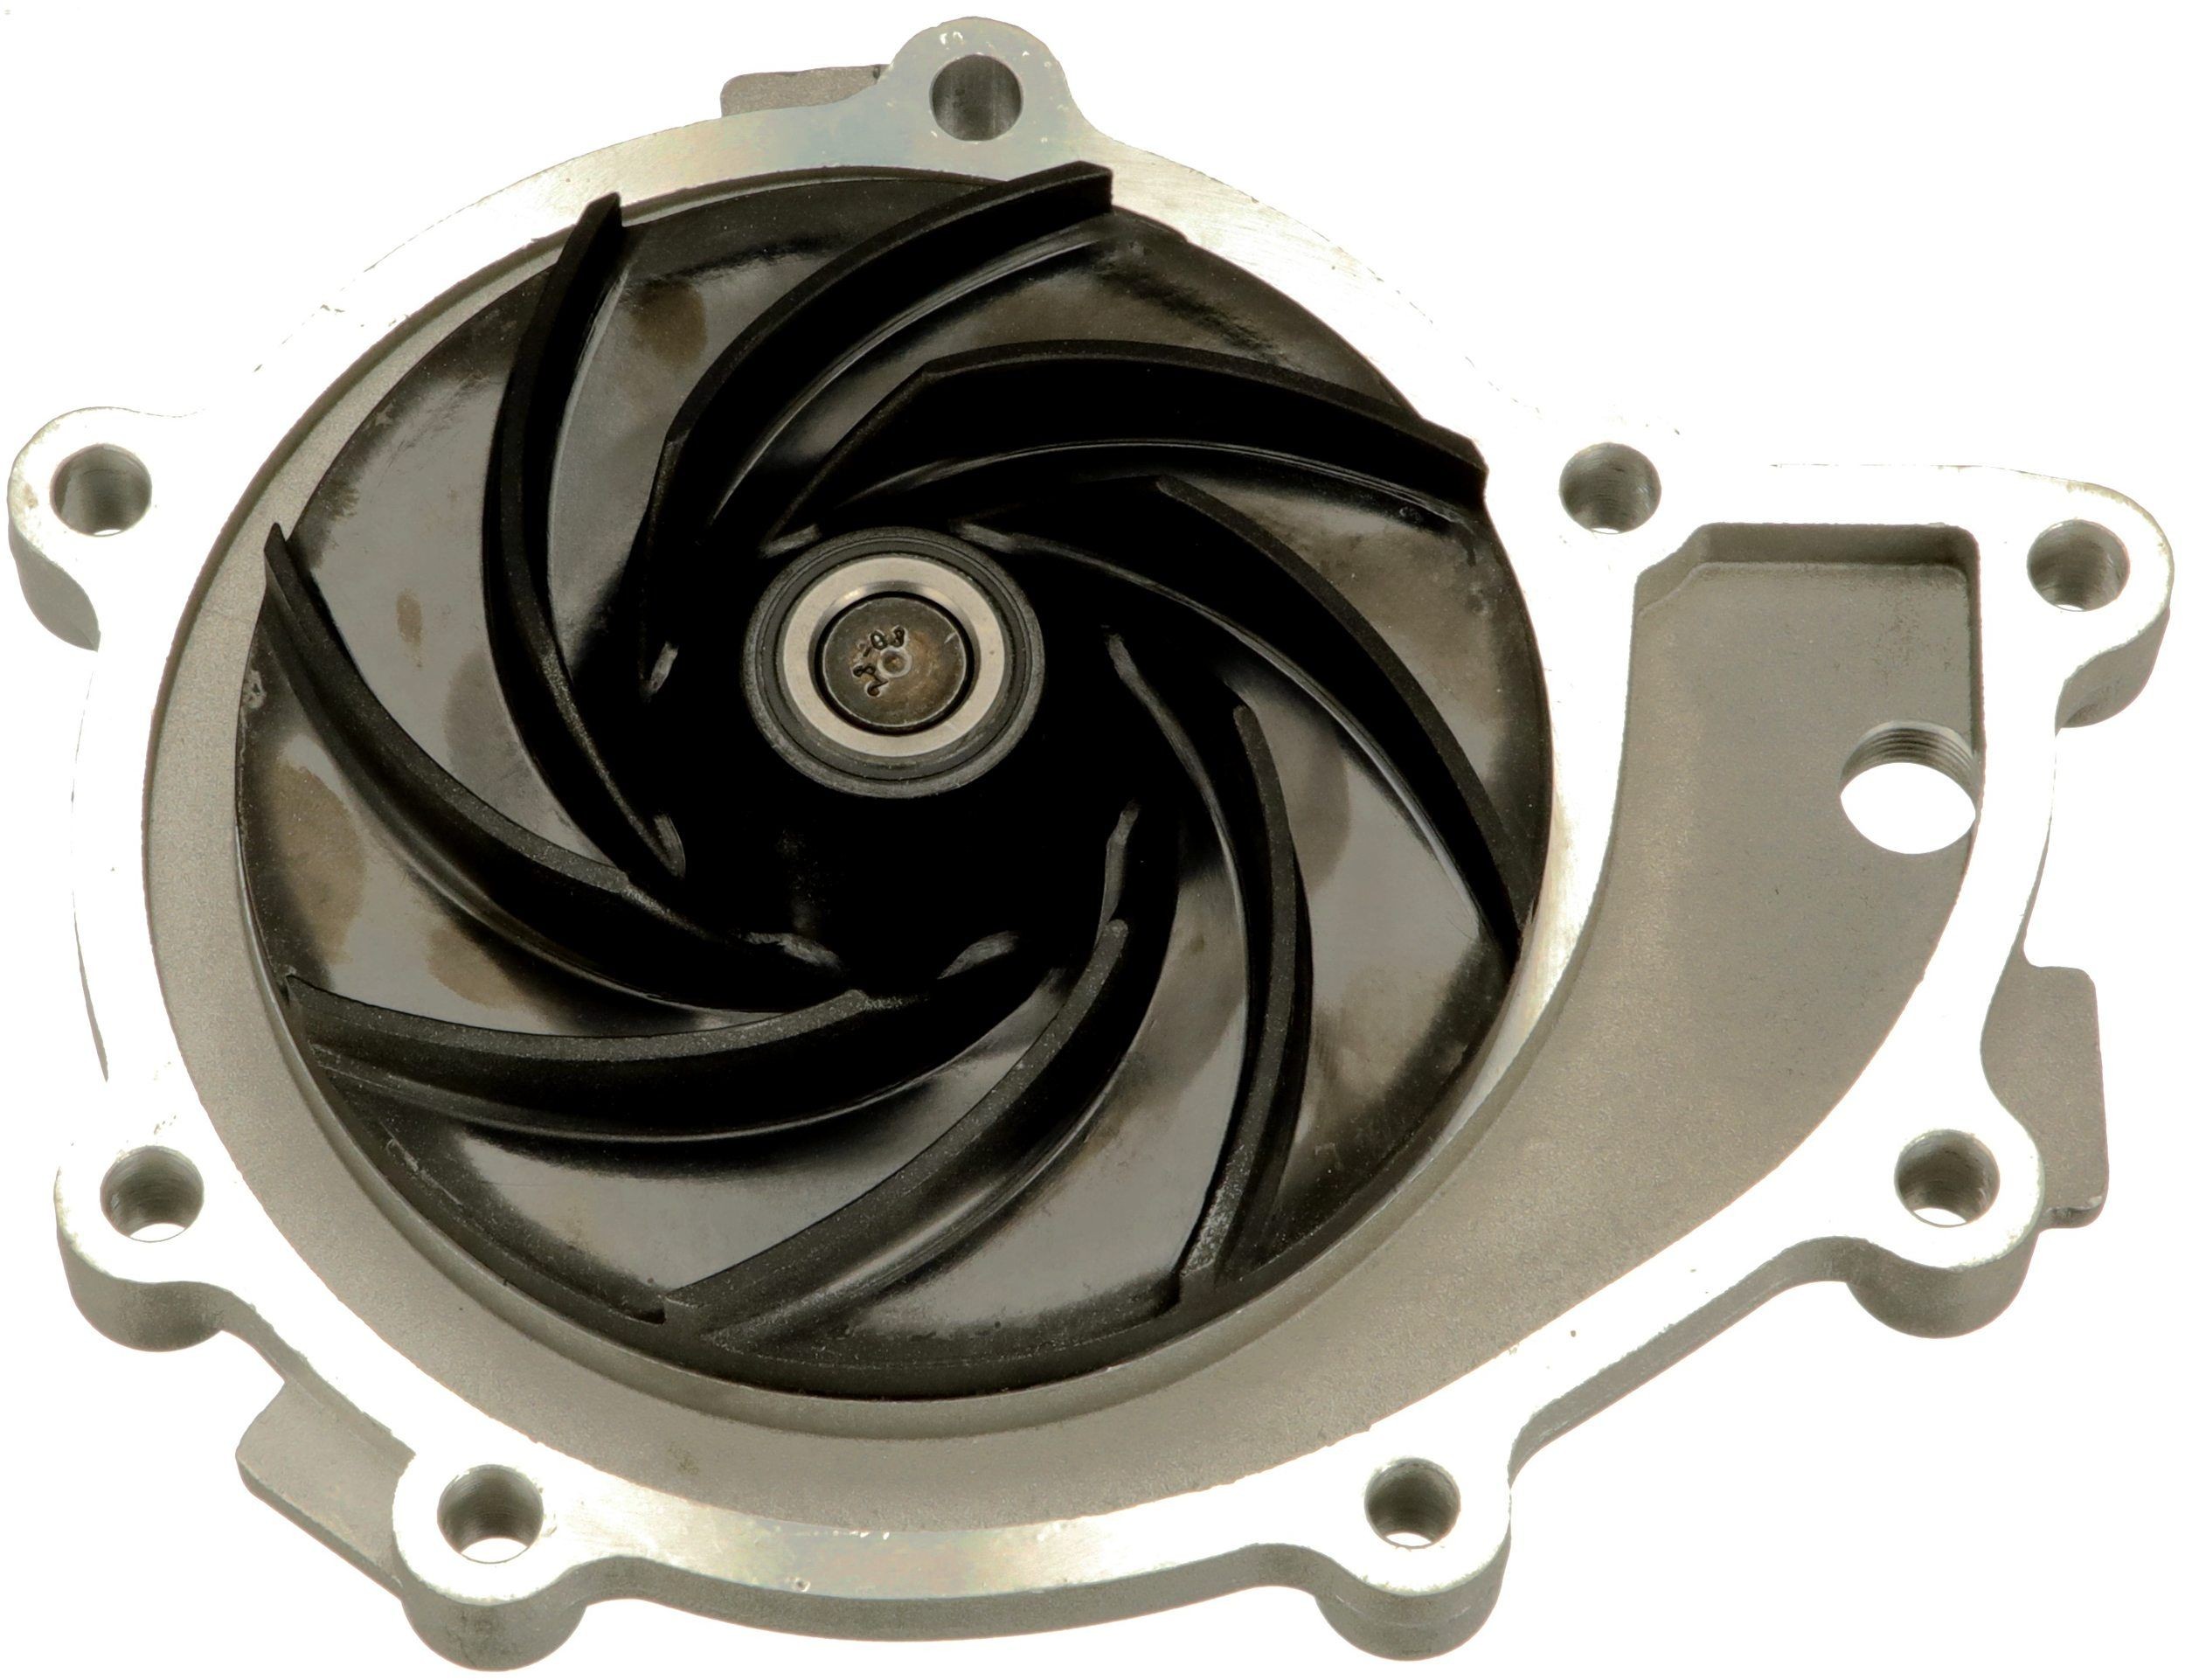 GATES 7702-15067 Water pump Metal, without belt pulley, for v-ribbed belt pulley, with gaskets/seals